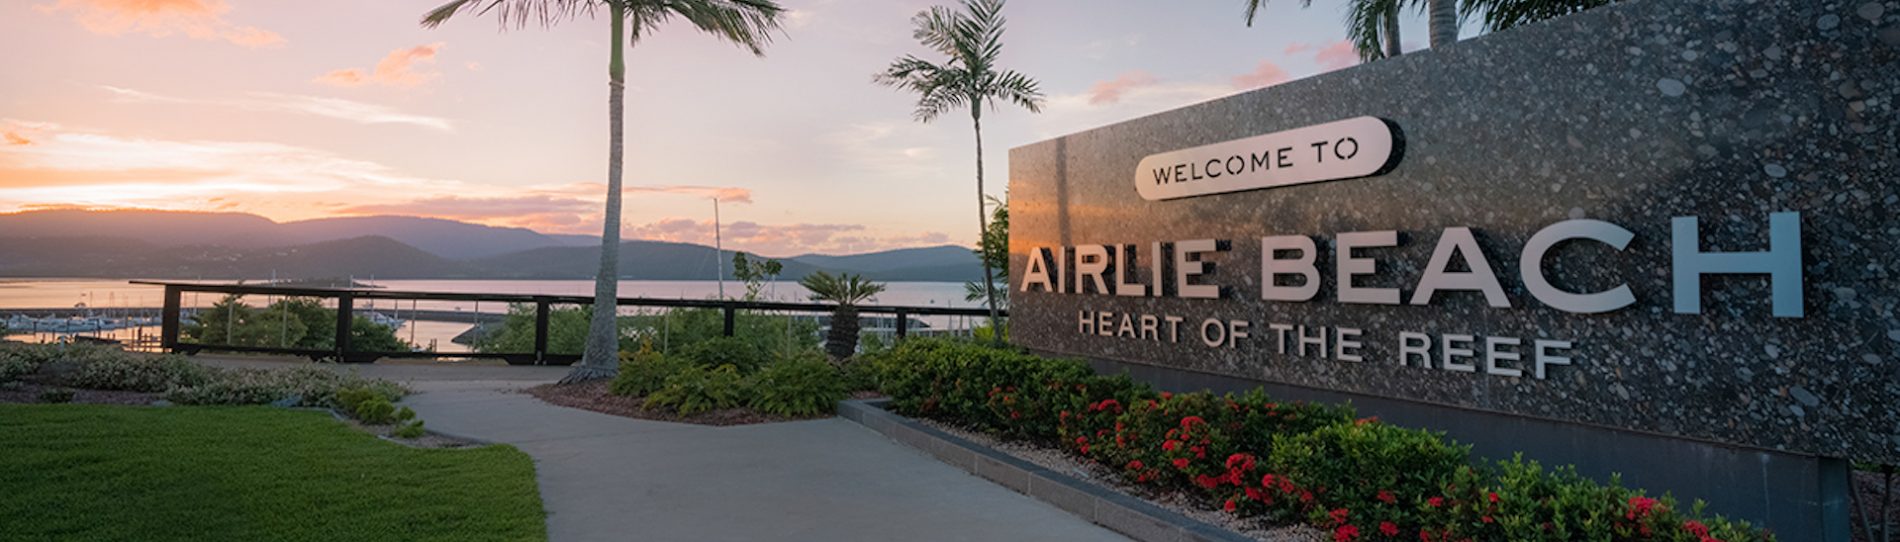 airlie beach entrance plaque welcome to airlie beach